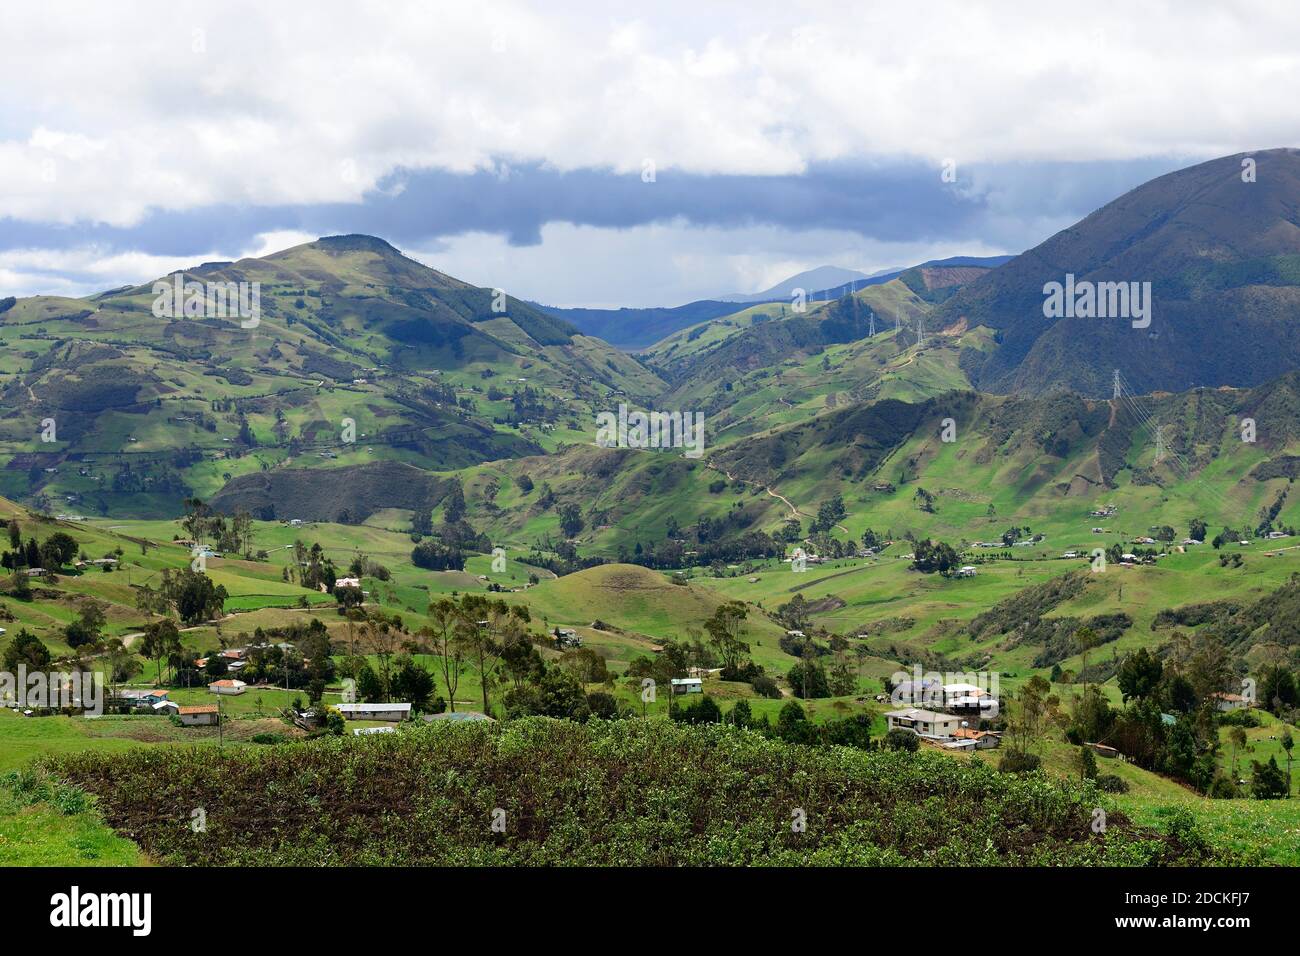 Agriculturally used hill country, near Cuenca, Azuay province, Ecuador Stock Photo